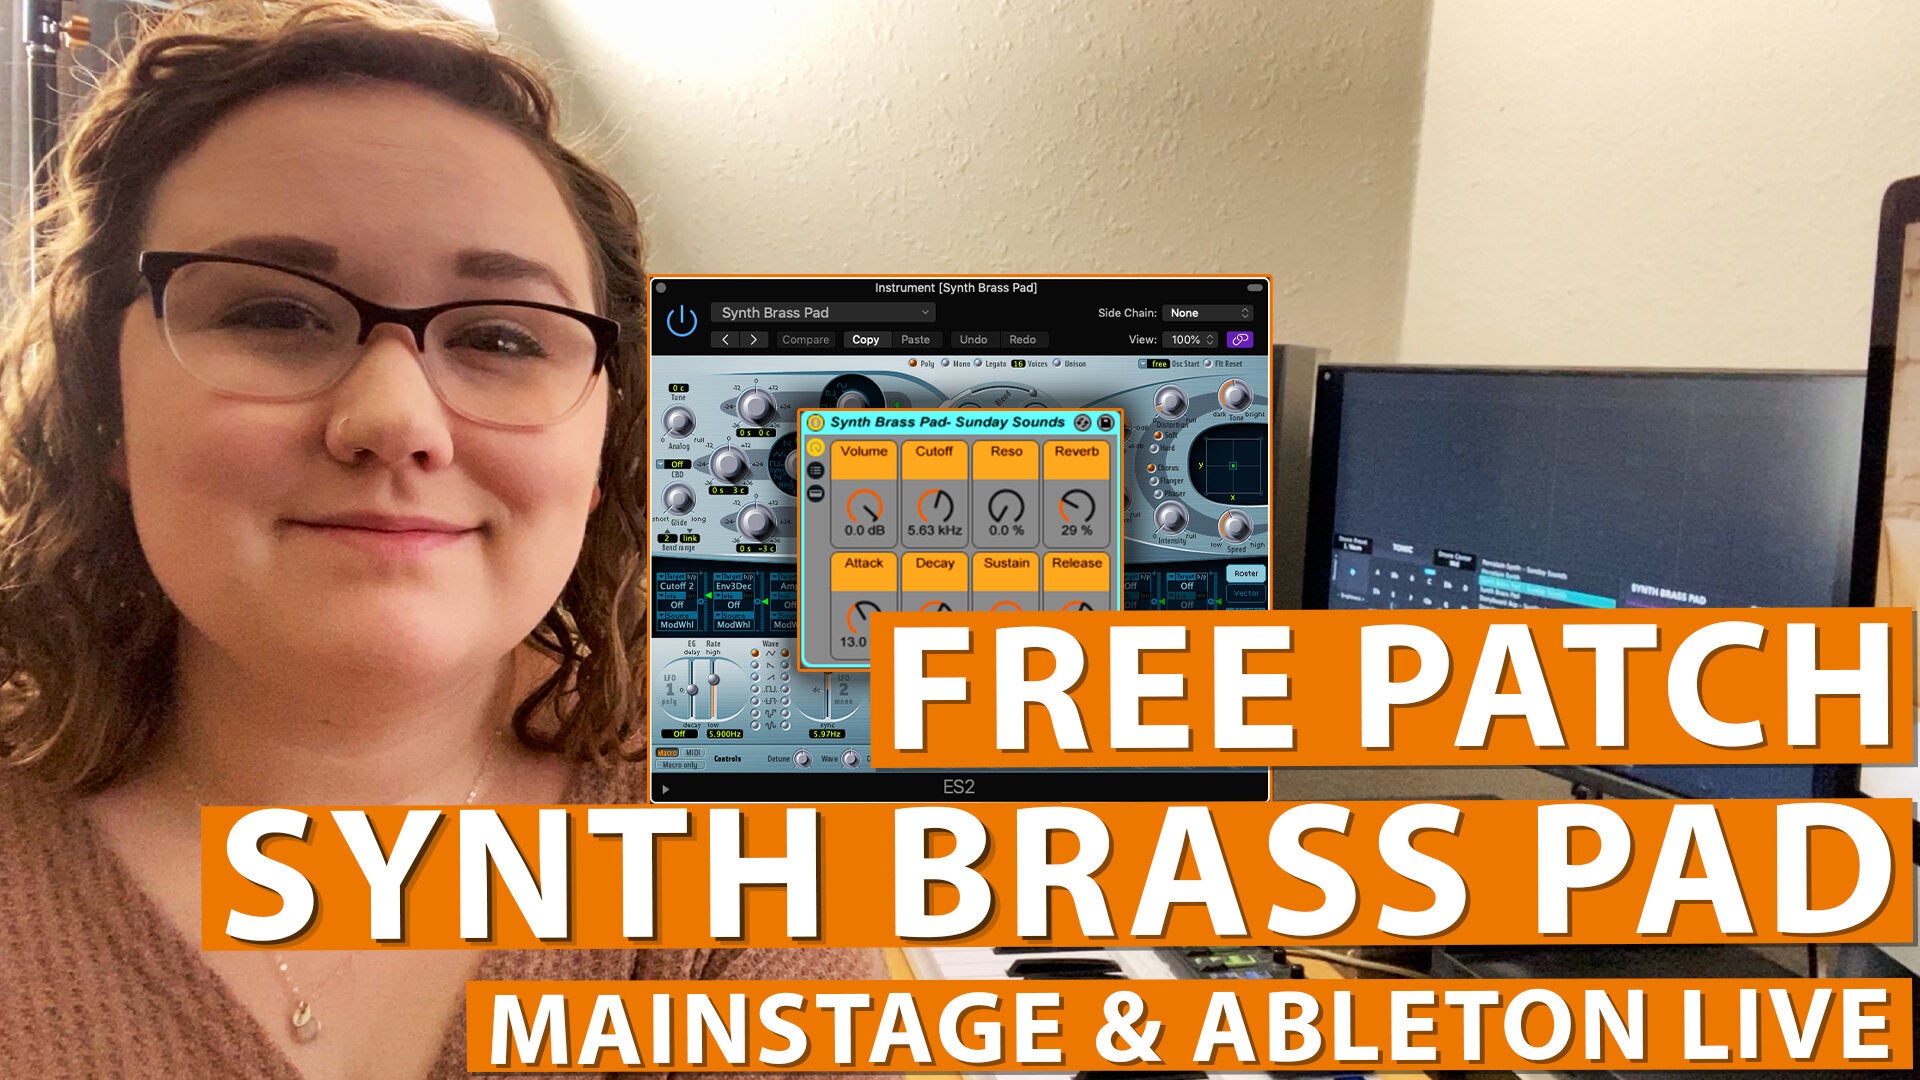 Free MainStage & Ableton Worship Patch! - Synth Brass Pad